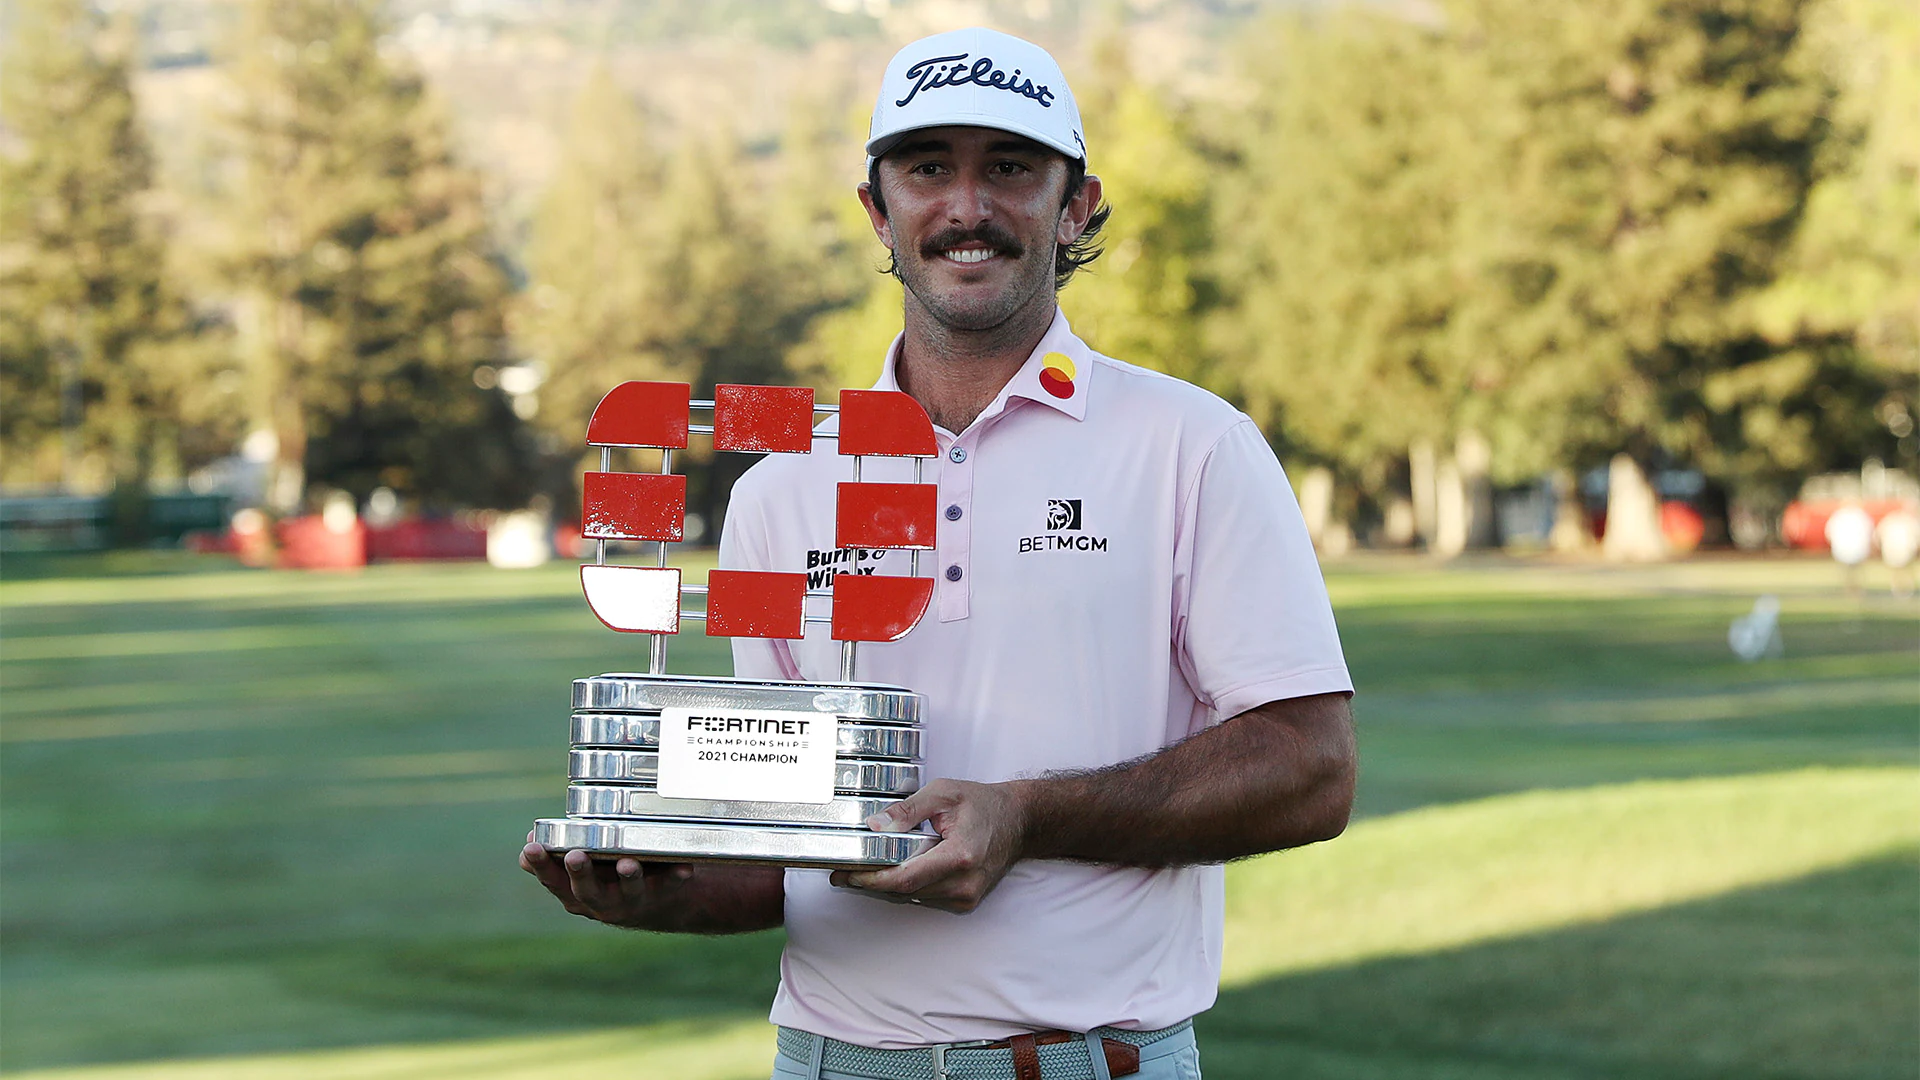 Max Homa surges on back nine to win the season-opening Fortinet Championship